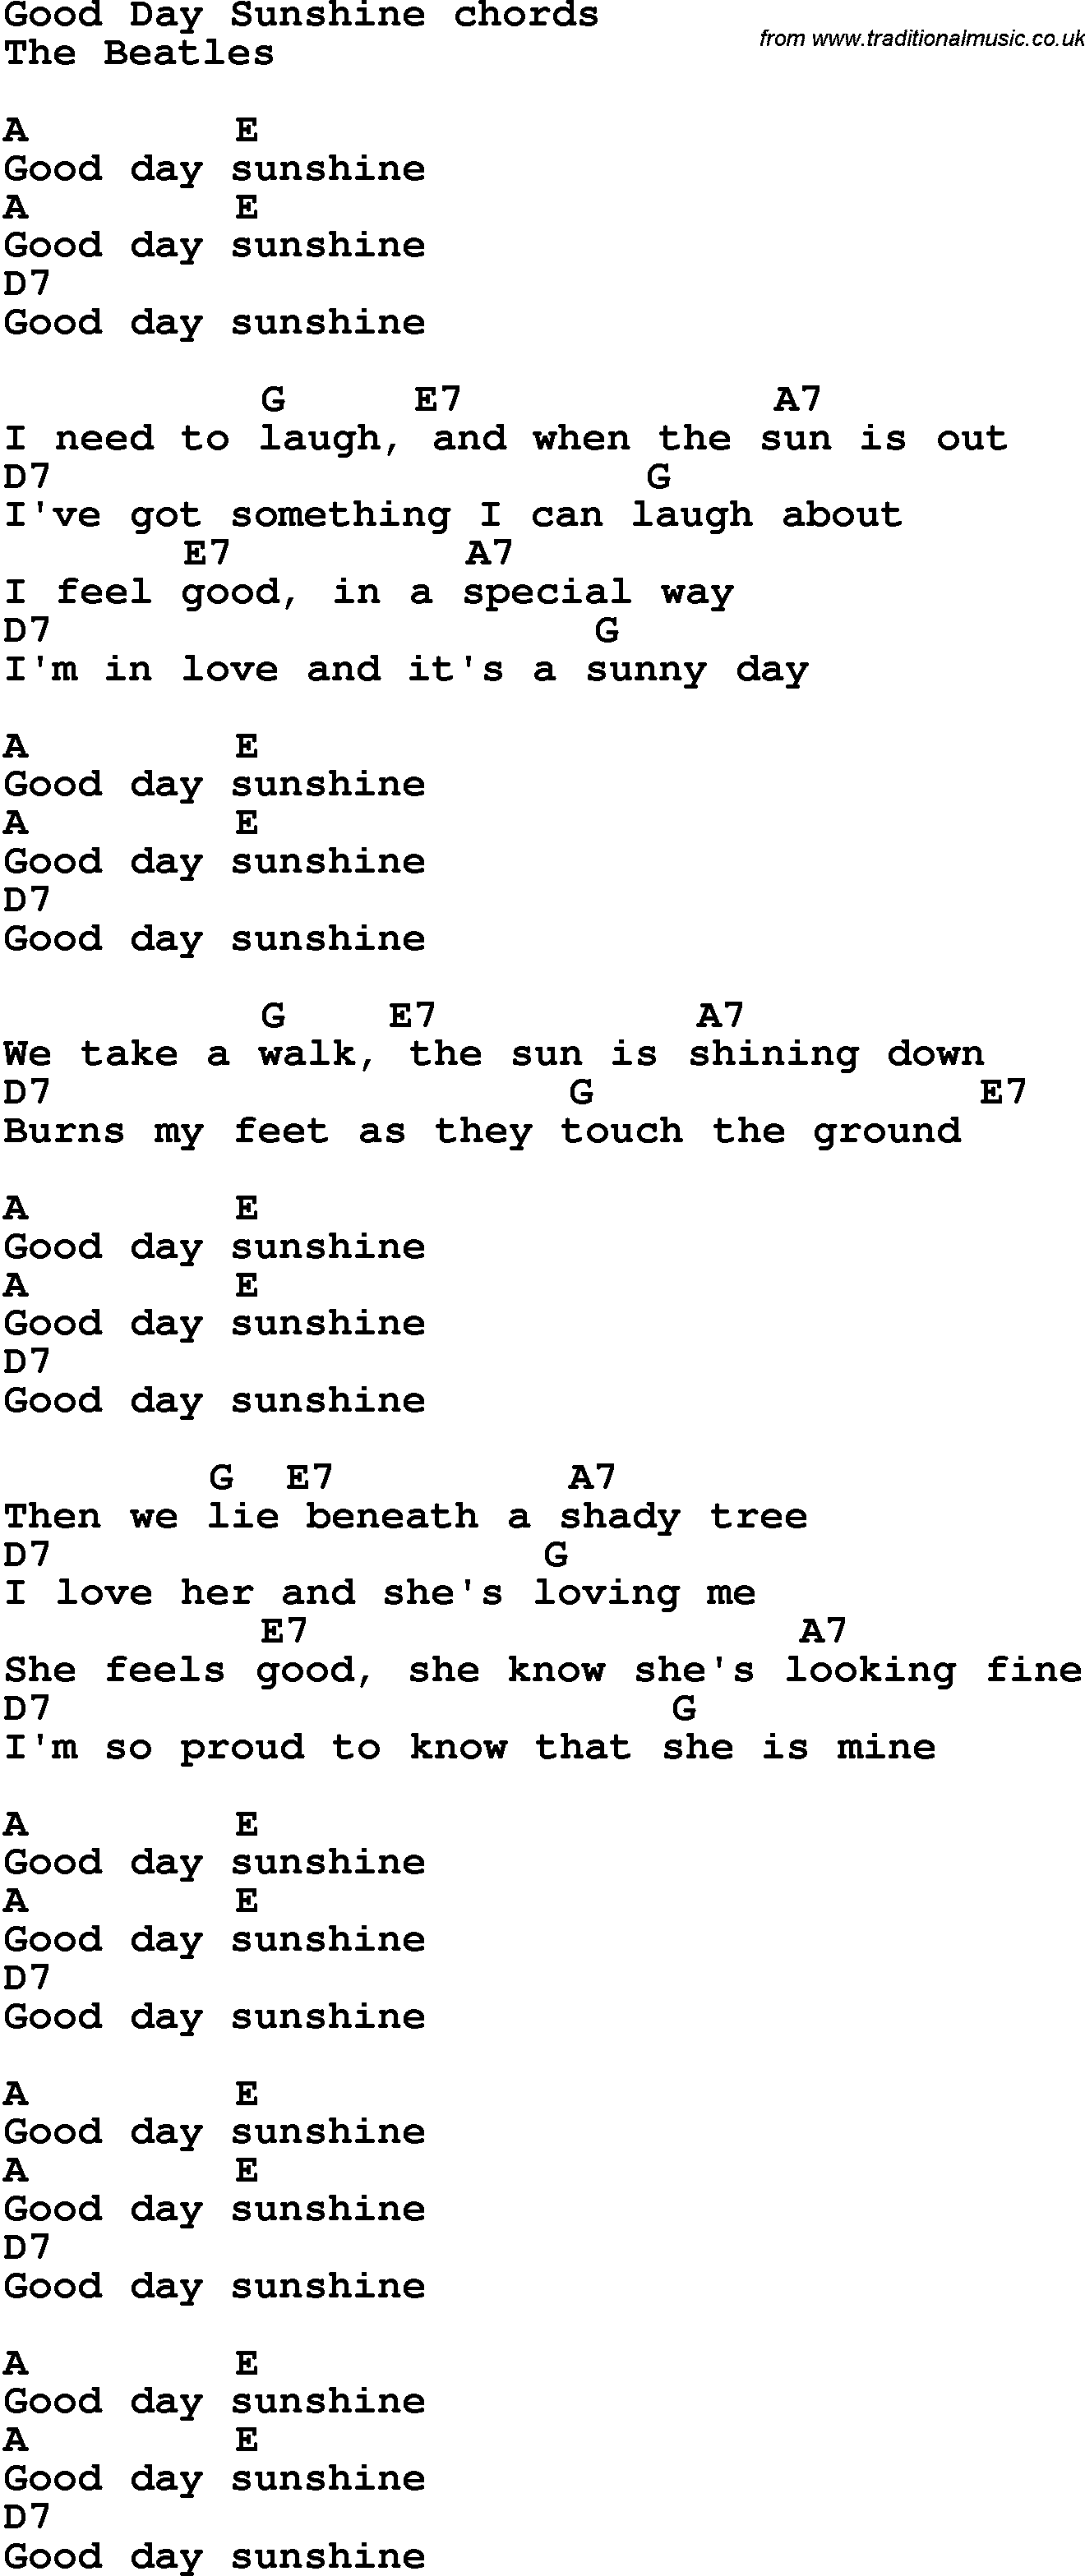 Song Lyrics with guitar chords for Good Day Sunshine - The Beatles